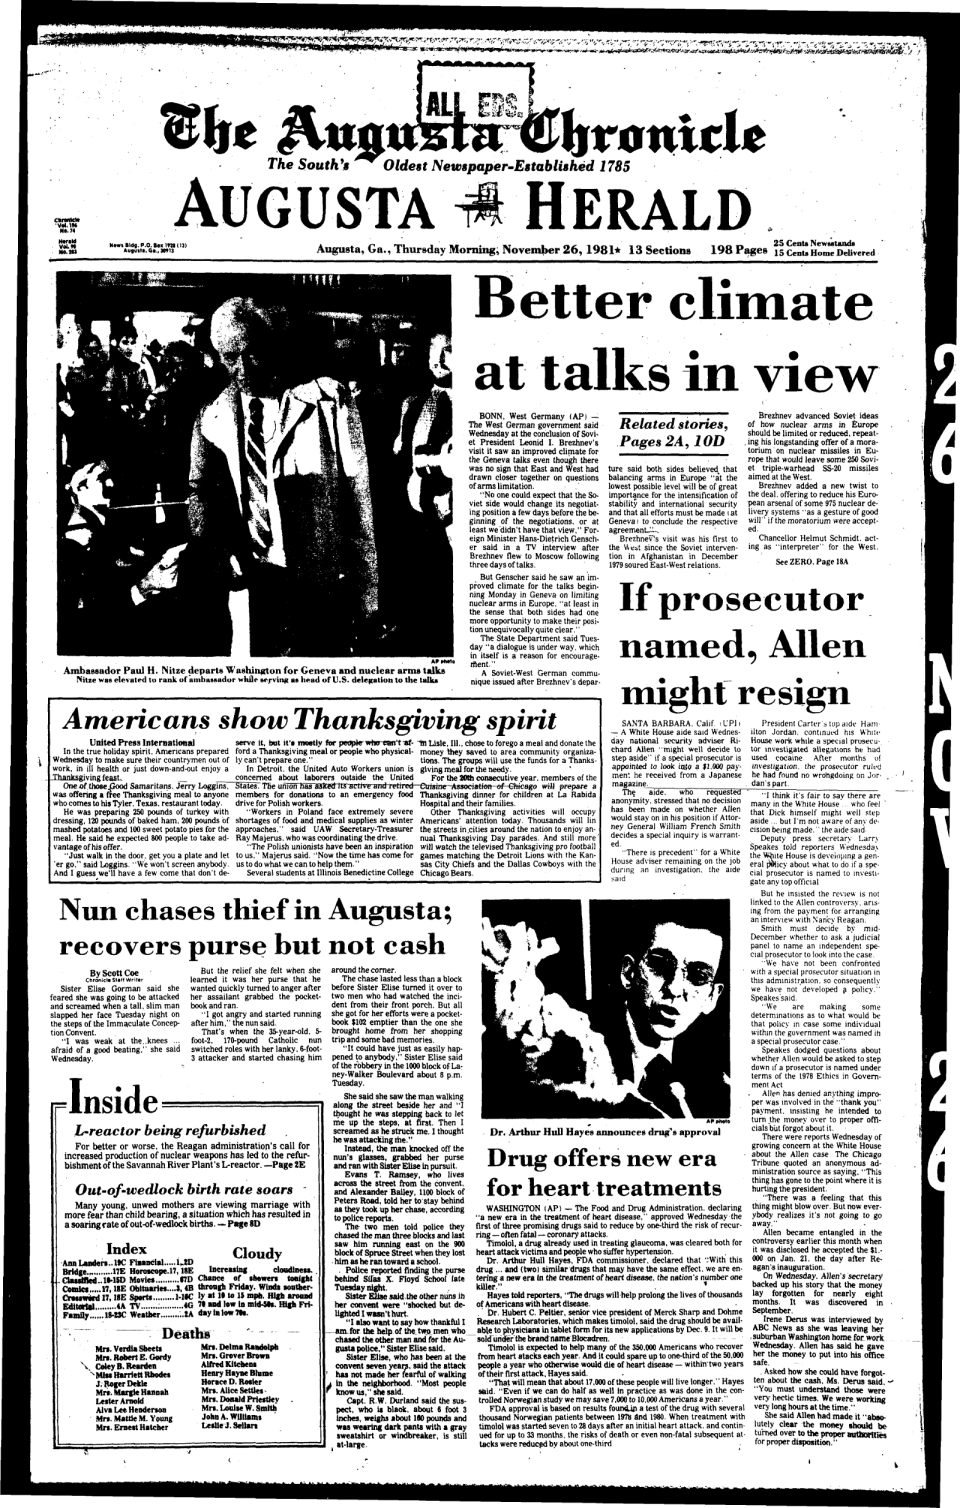 The front page of the Augusta Chronicle on Thanksgiving on November 26, 1981.